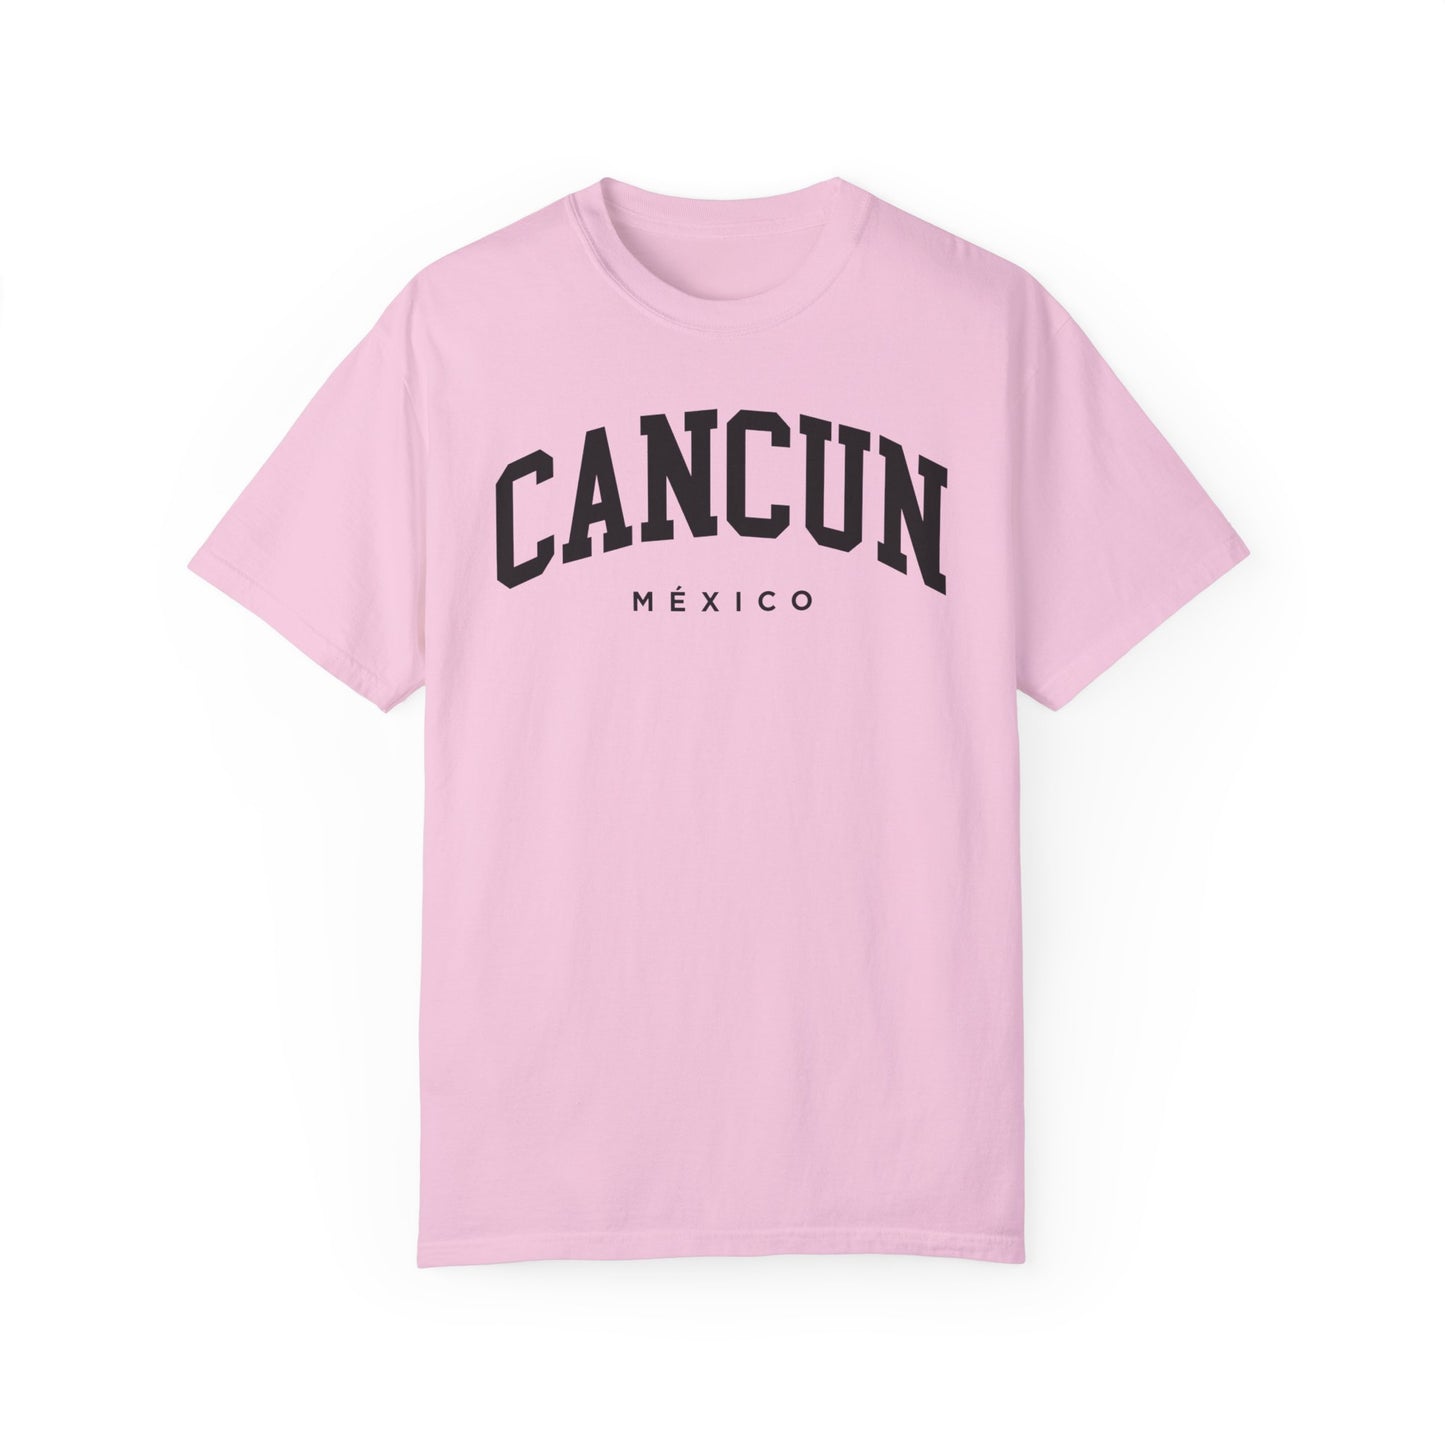 Cancun Mexico Comfort Colors® Tee